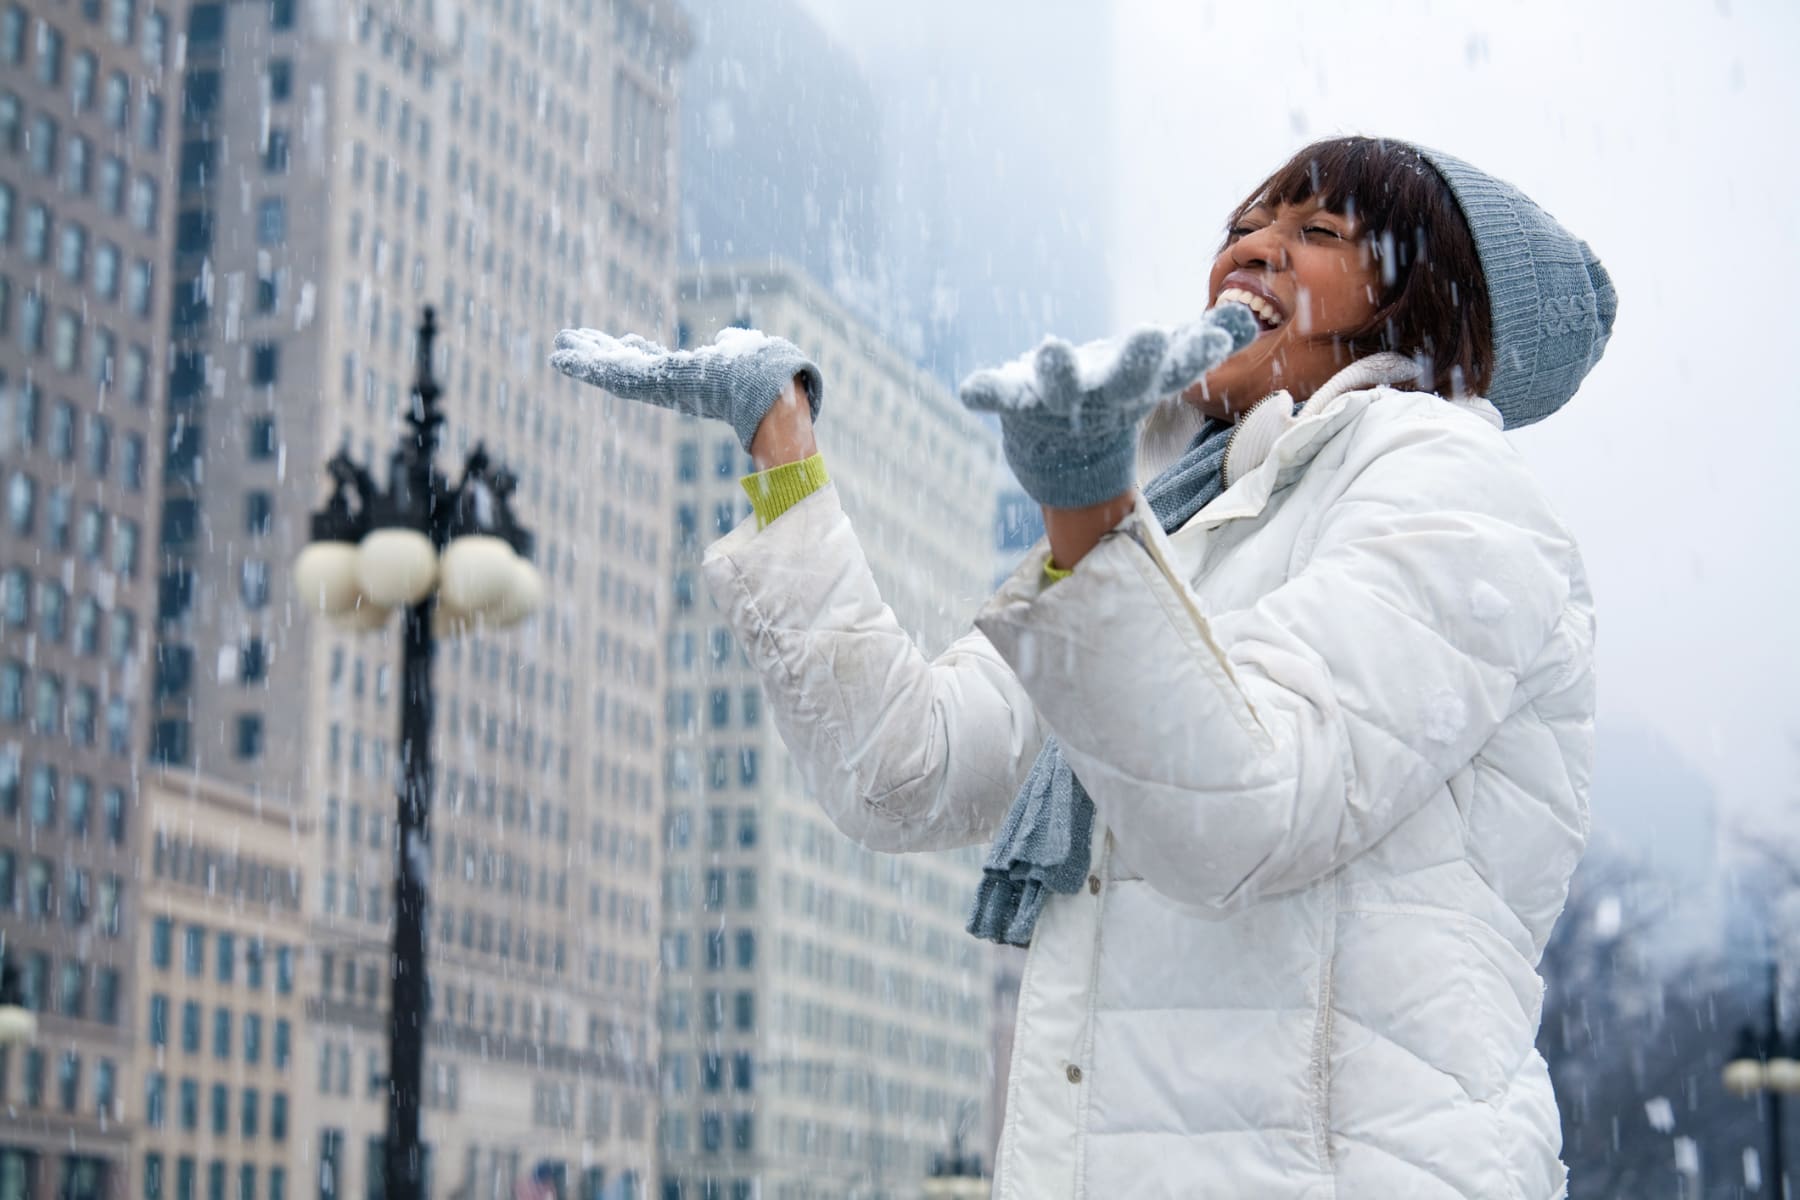 Woman laughs while catching snow in the city.